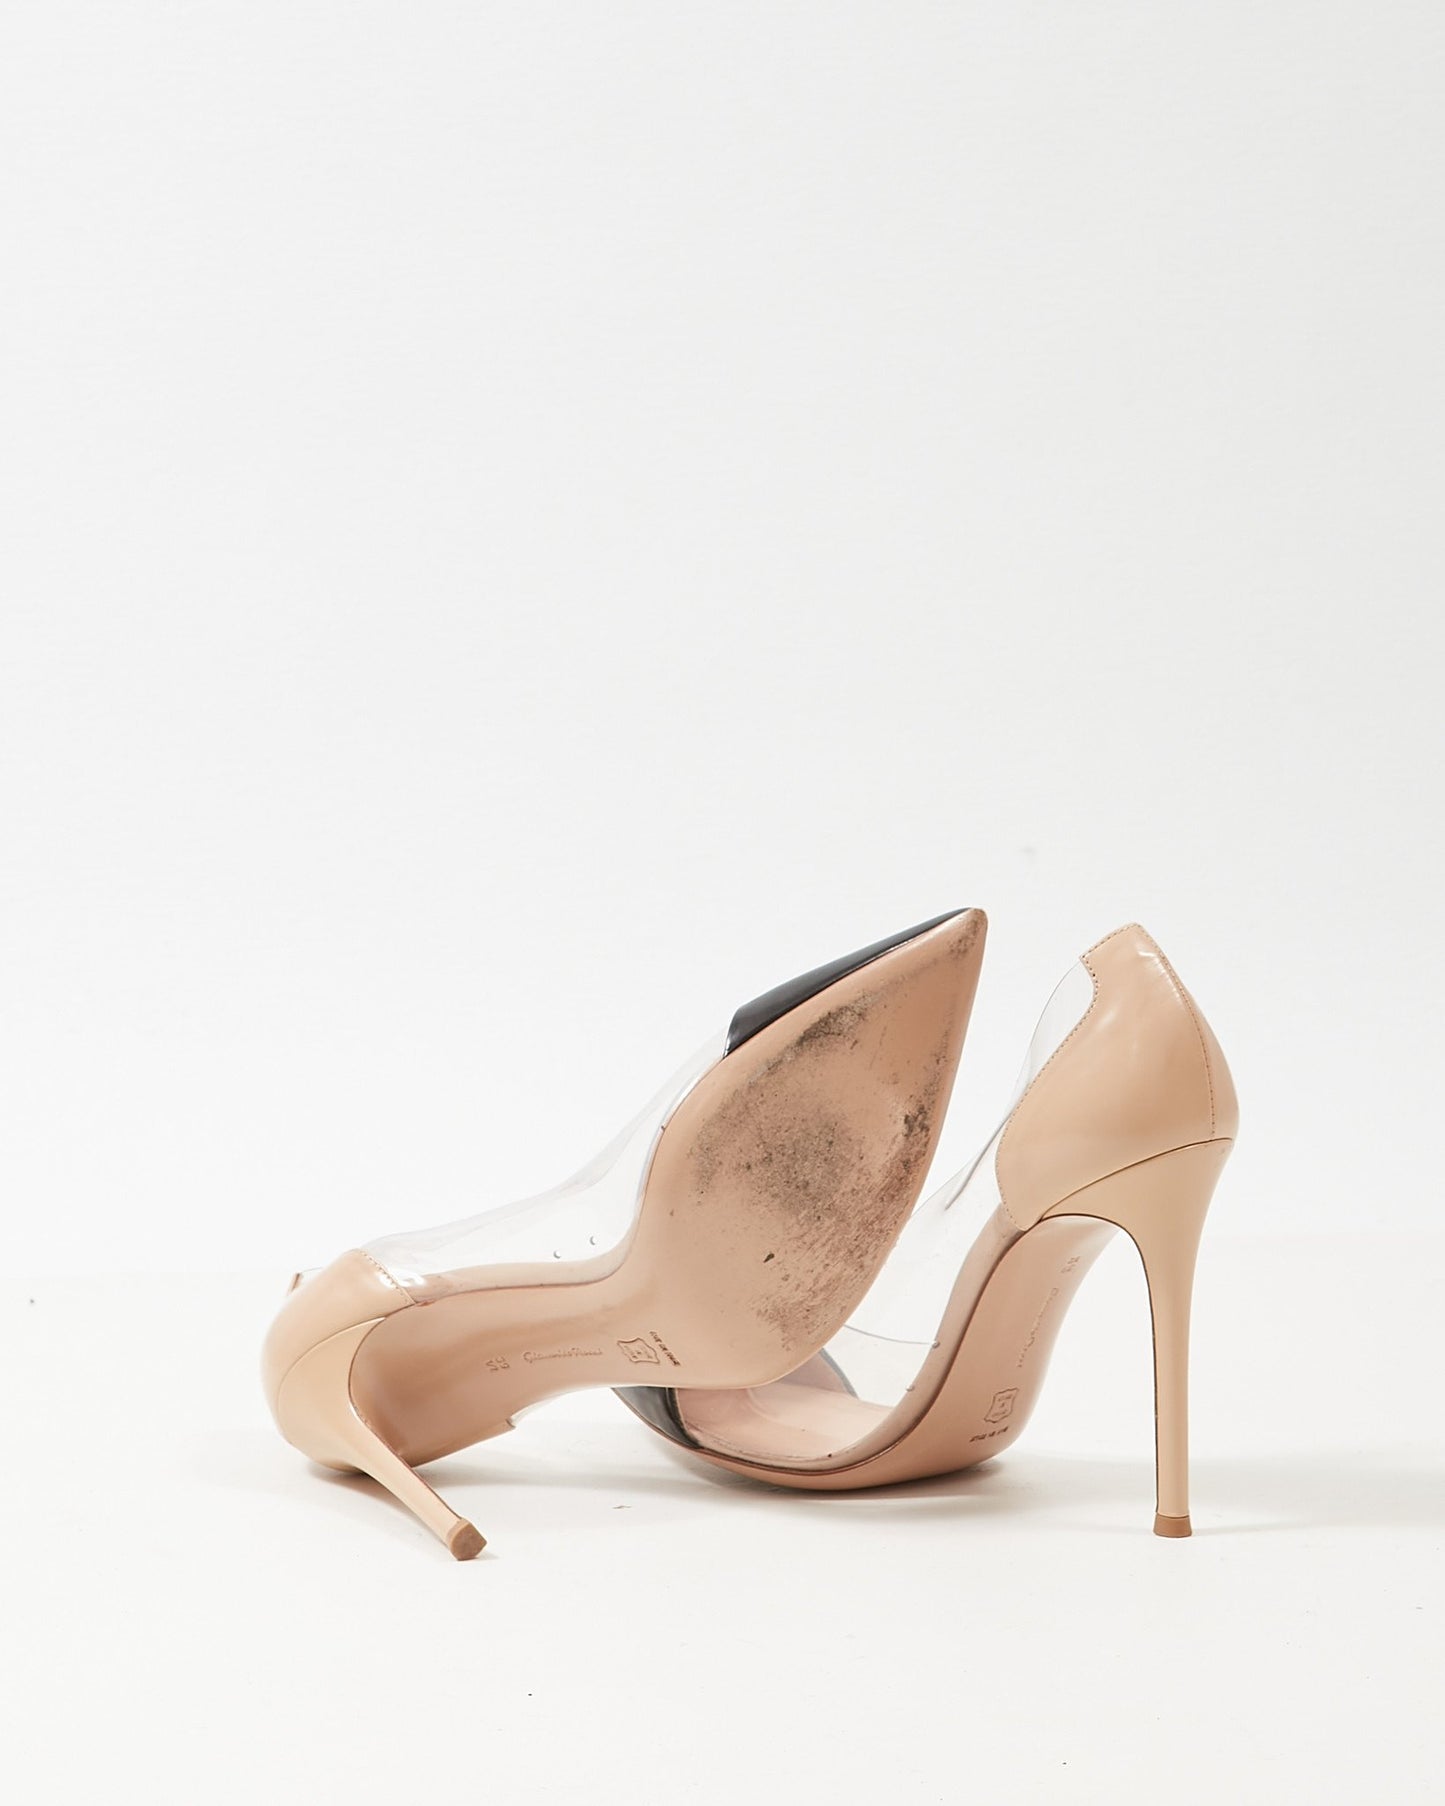 Gianvito Rossi Beige Leather and Plexi Pointed Toe 105mm Pumps - 39.5